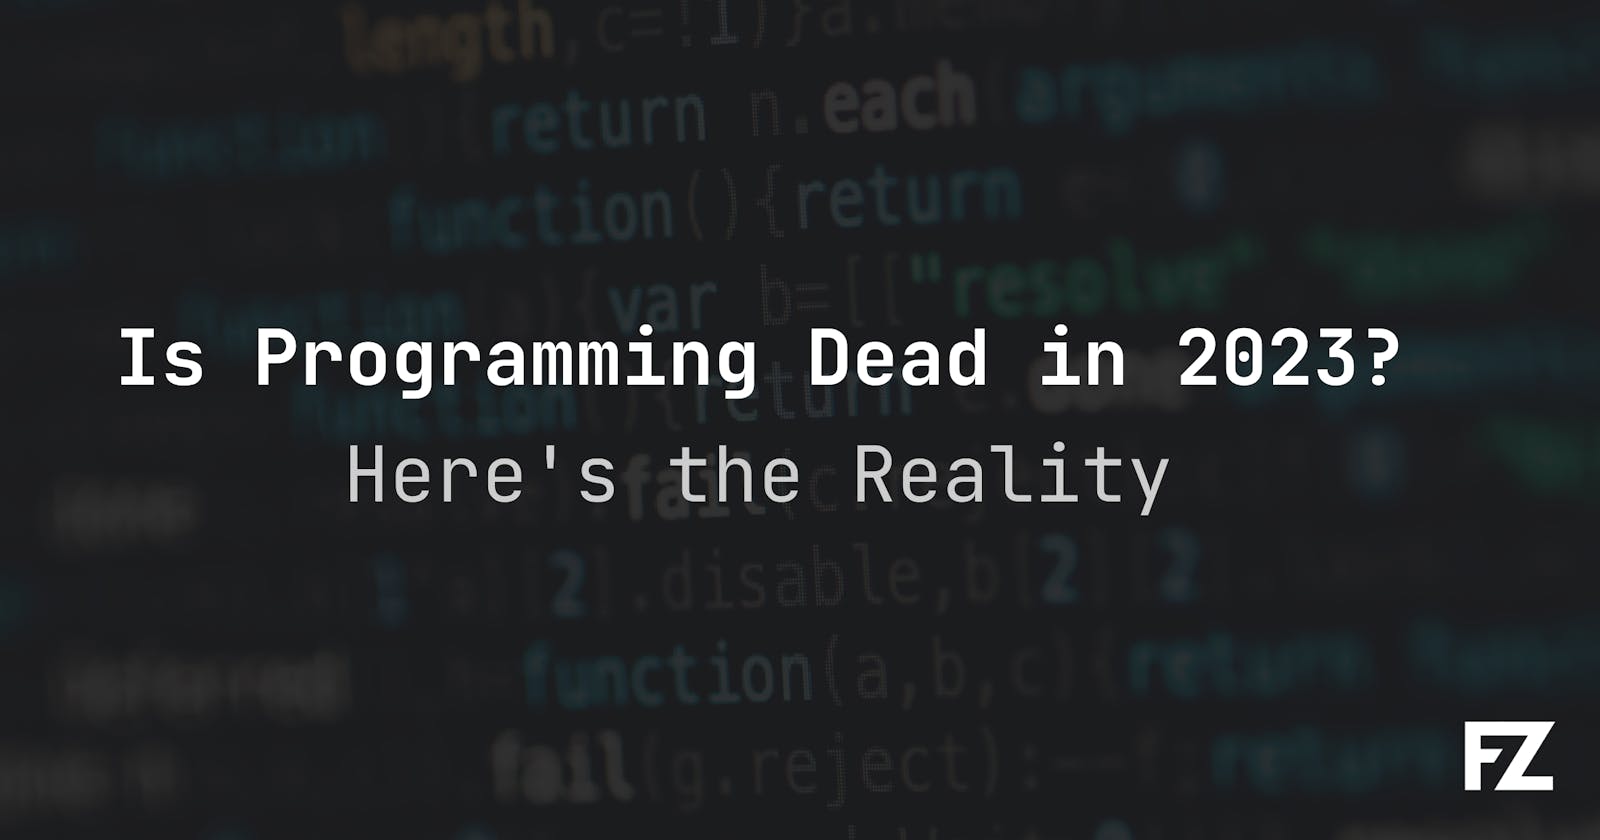 Is Programming Dead in 2023?: Here's the Reality